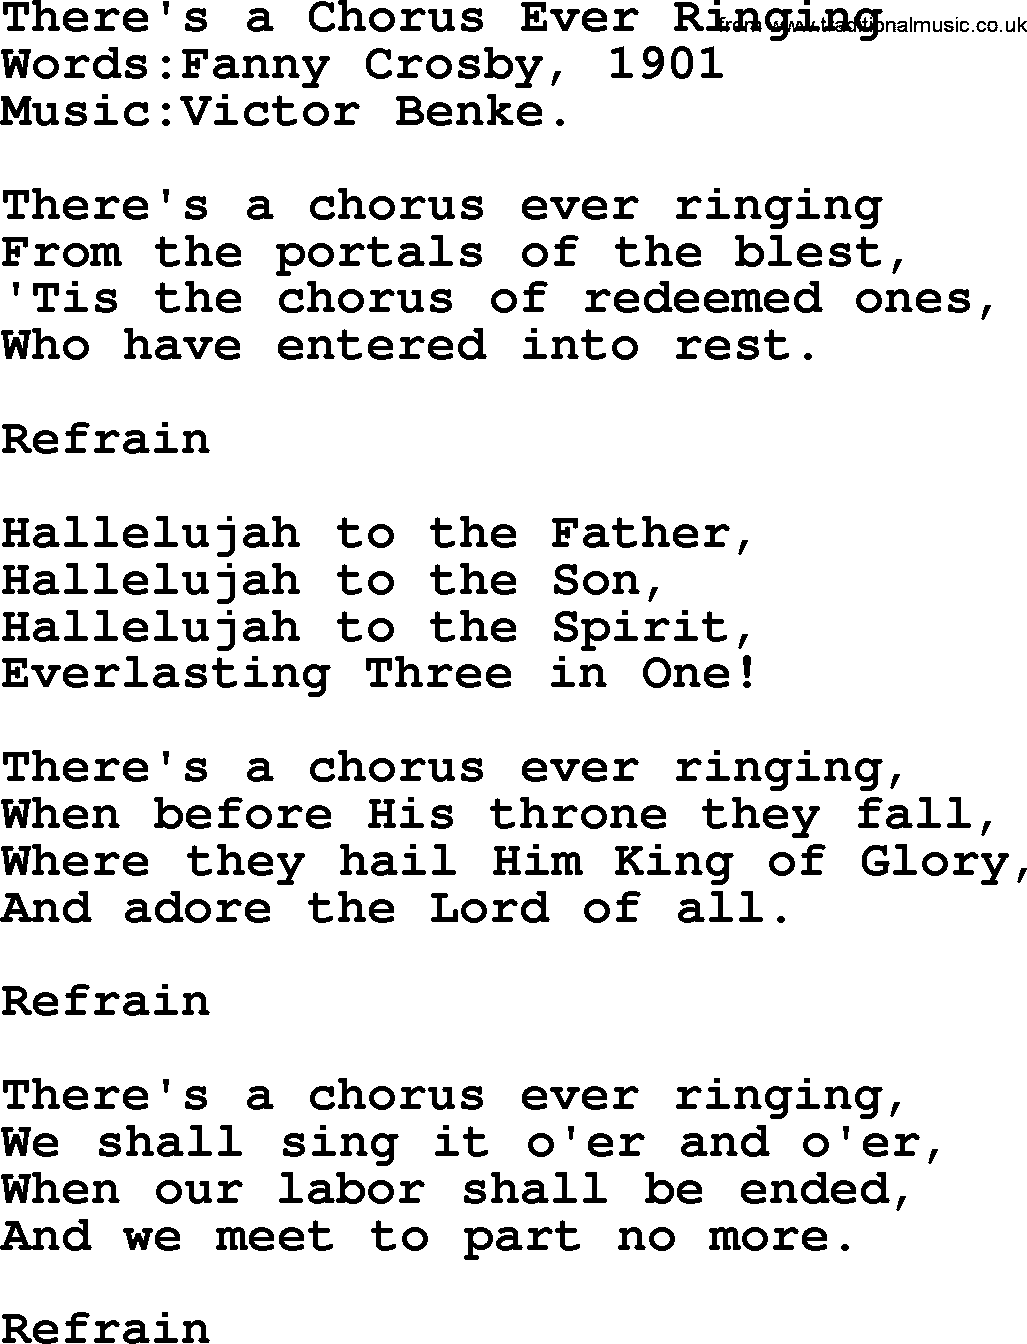 Songs and Hymns about Heaven: There's A Chorus Ever Ringing lyrics with PDF